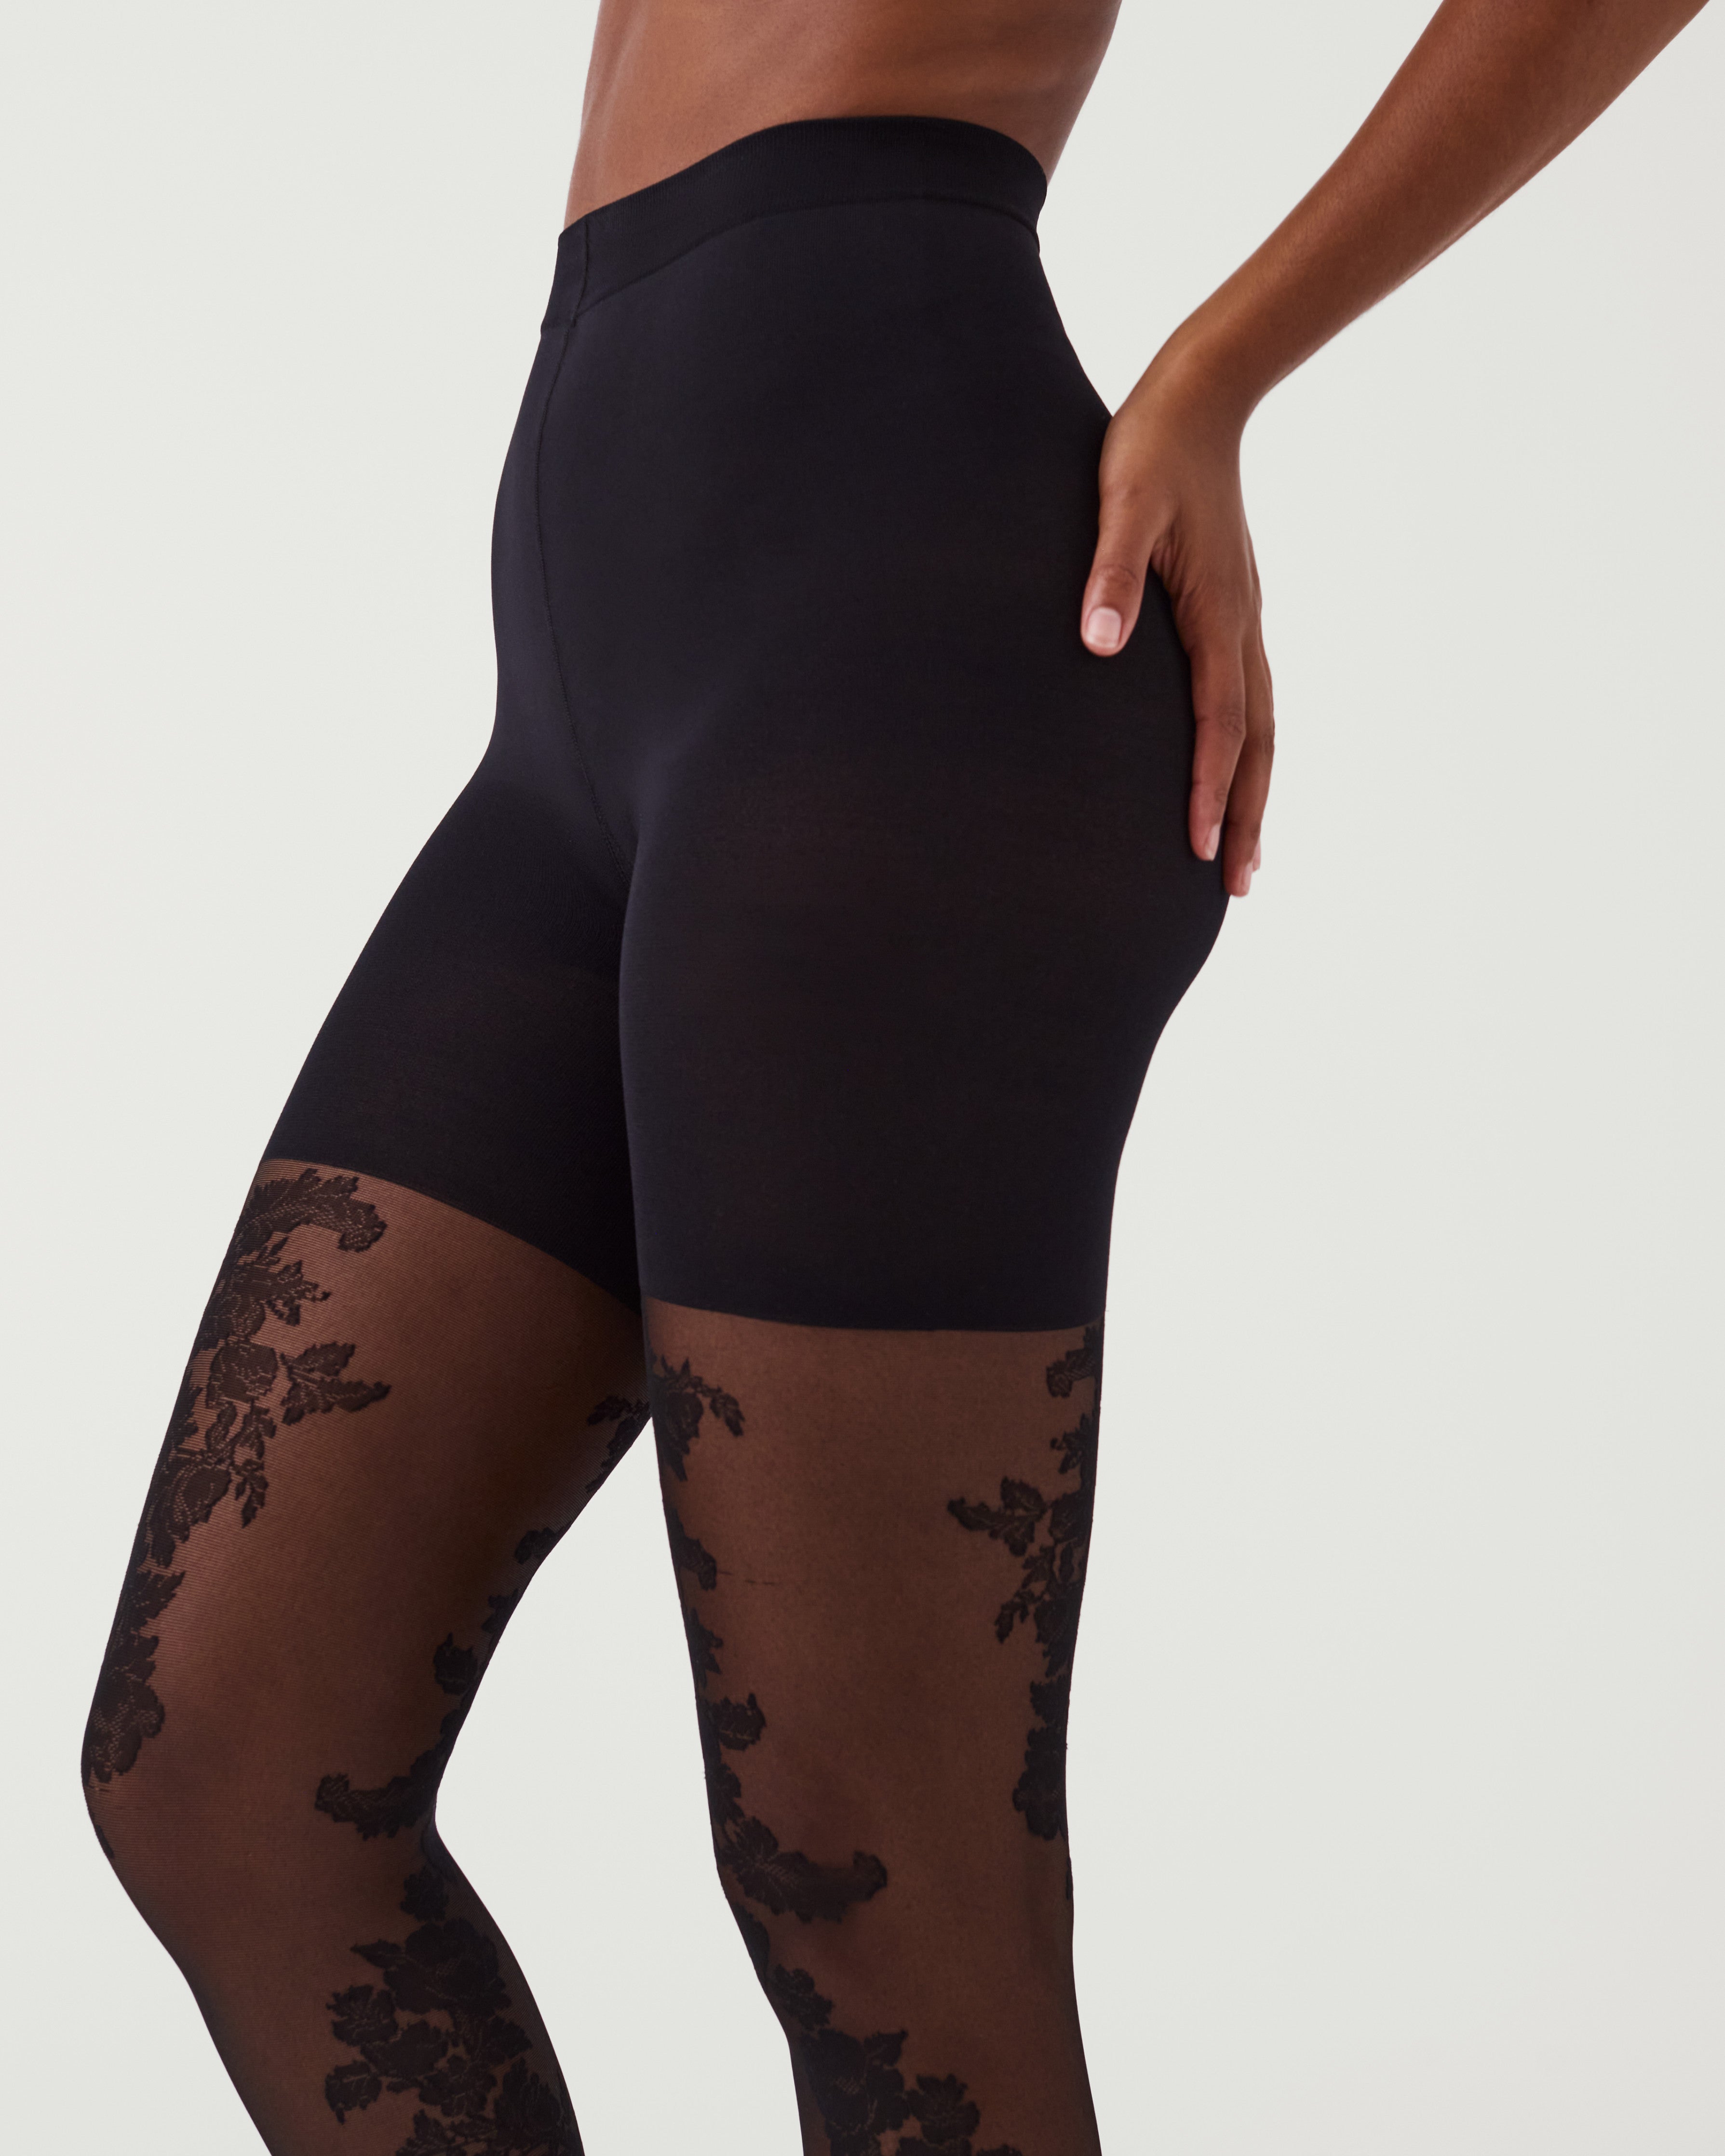 NWT $42 SPANX Size D FISHNET FLORAL MID-THIGH SHAPING TIGHTS Very